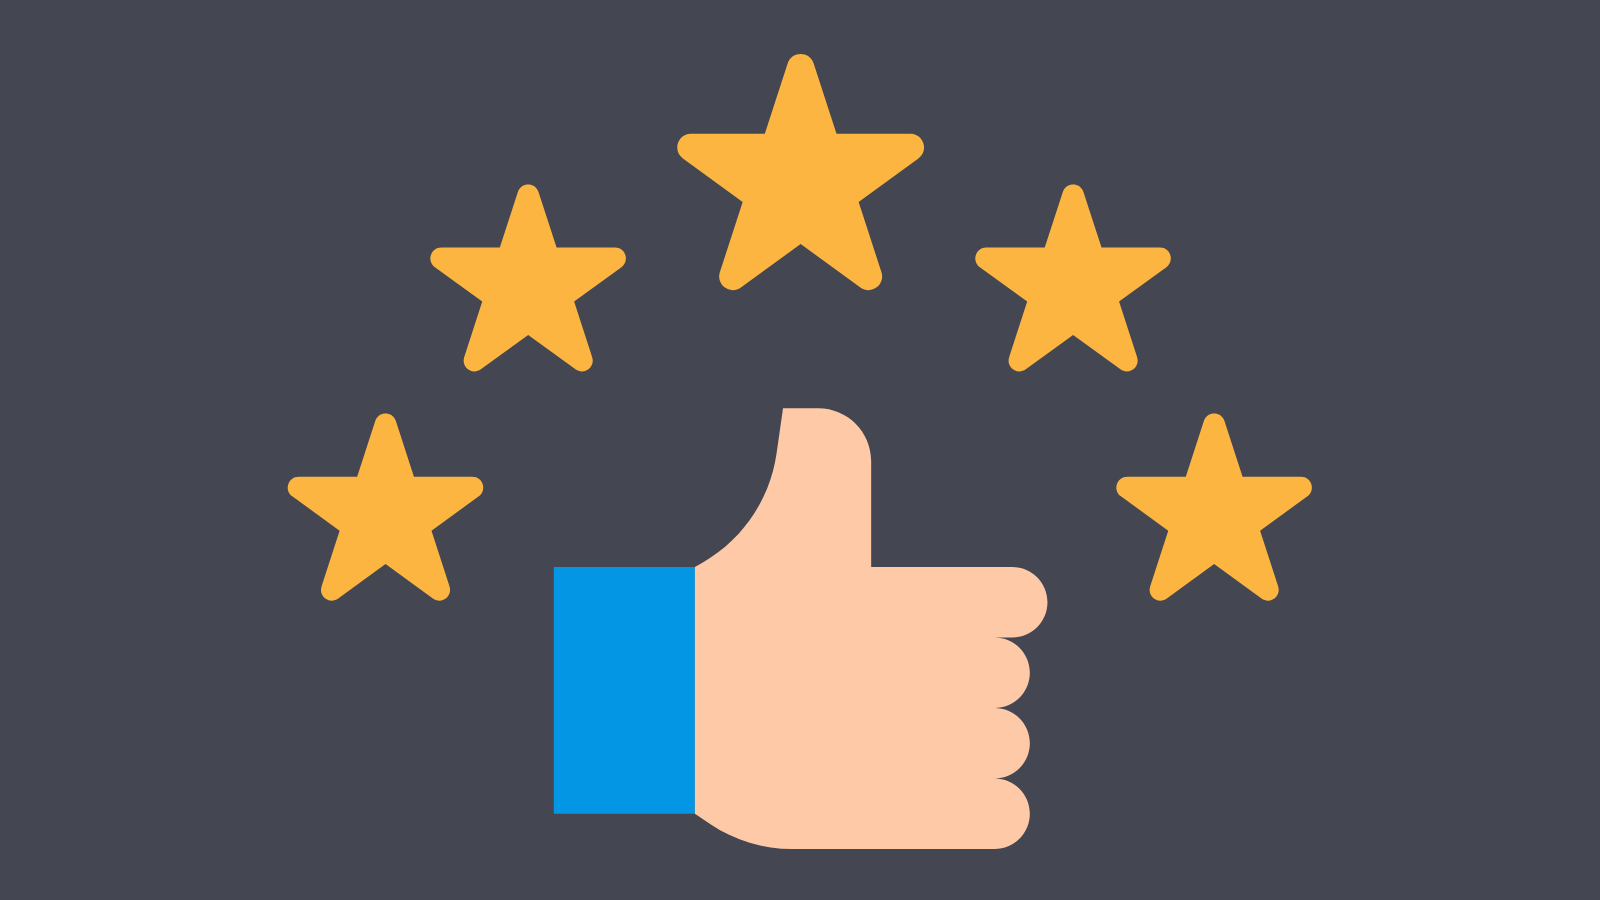 Thumbs up icon with five stars above and around it